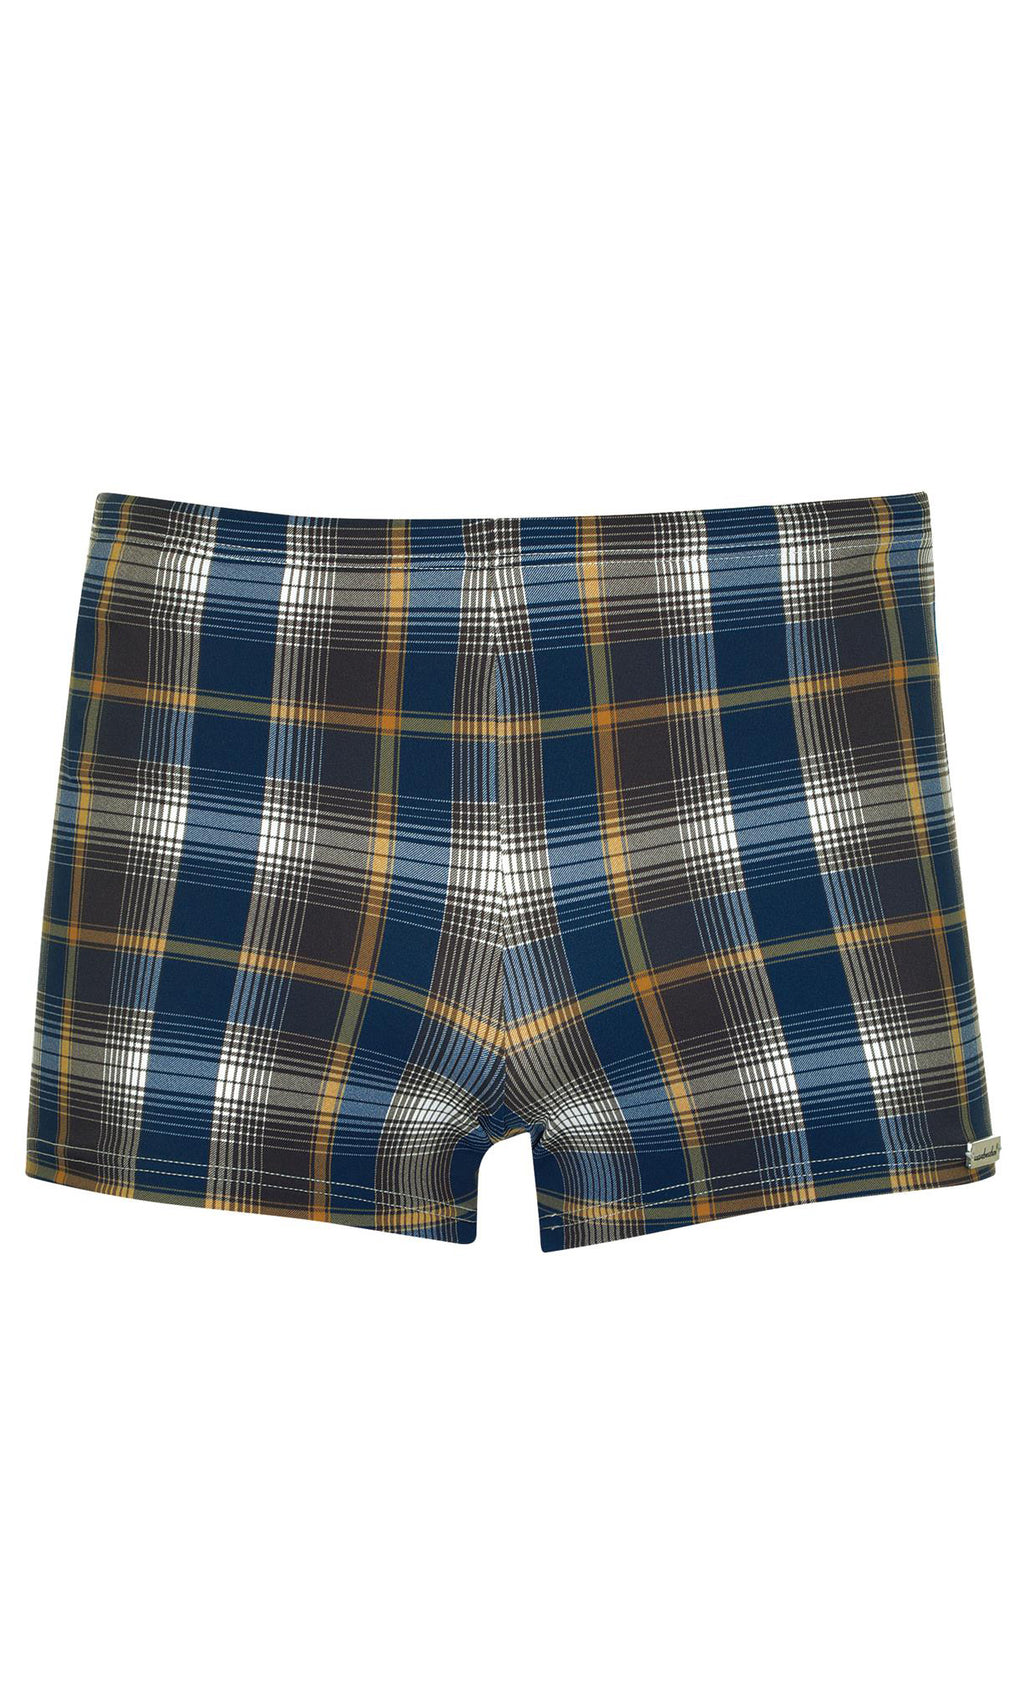 Classic Trunks Rectilinear Waters, More Colours, Special Order S - XL